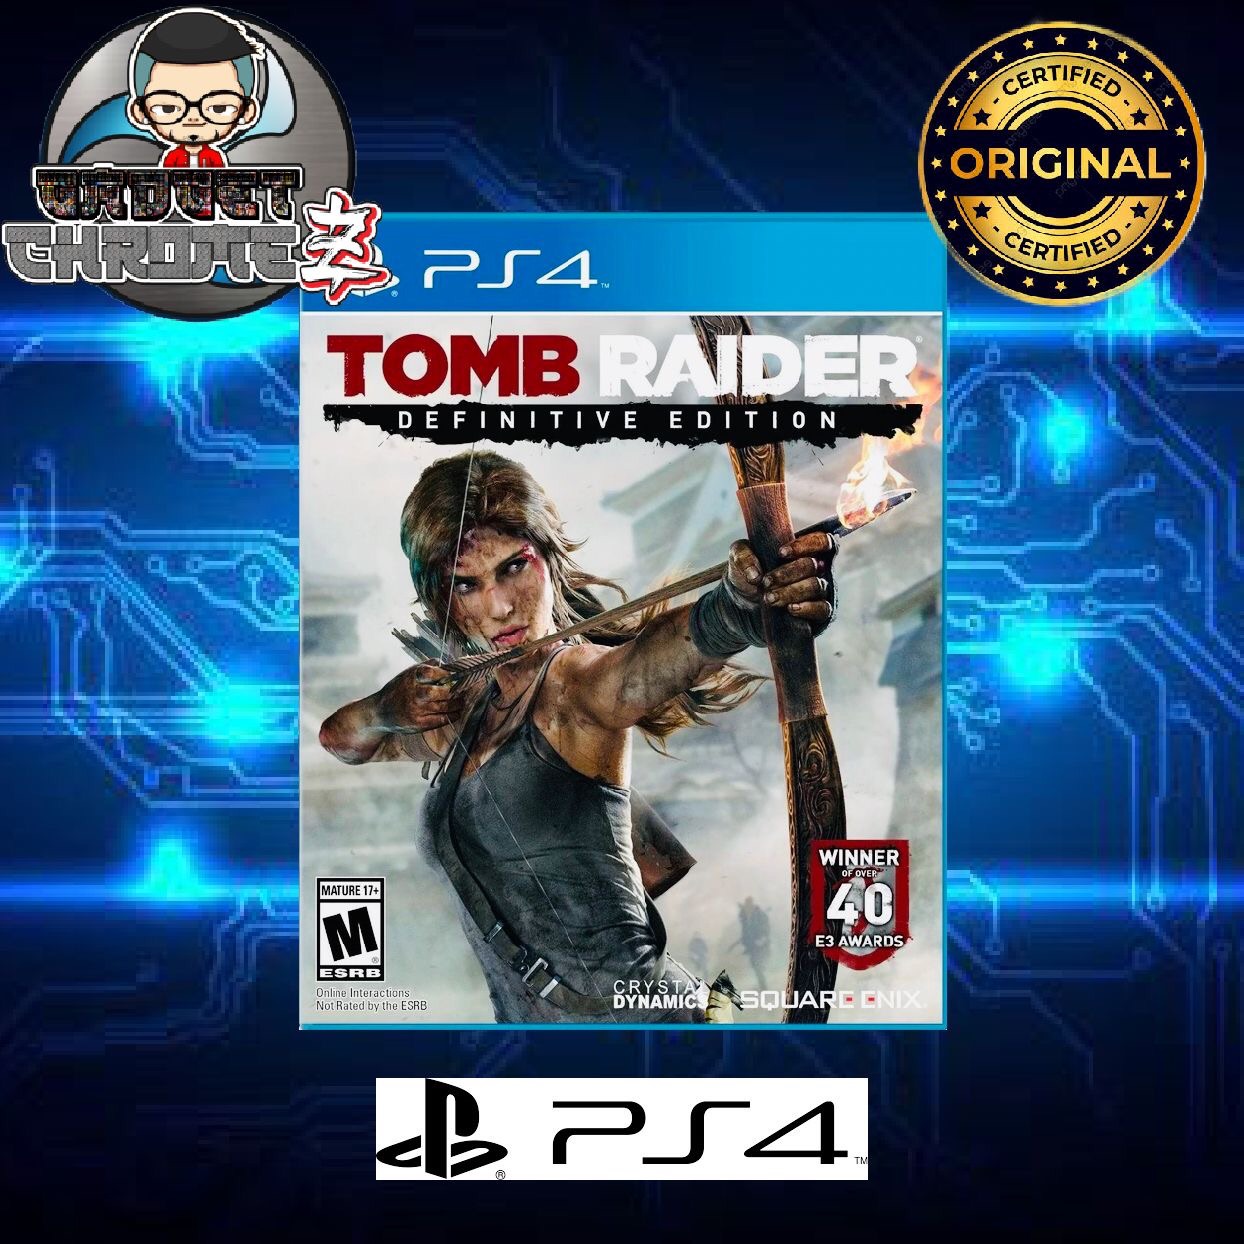 Shadow of the Tomb Raider - PS4 - Brand New | Factory Sealed